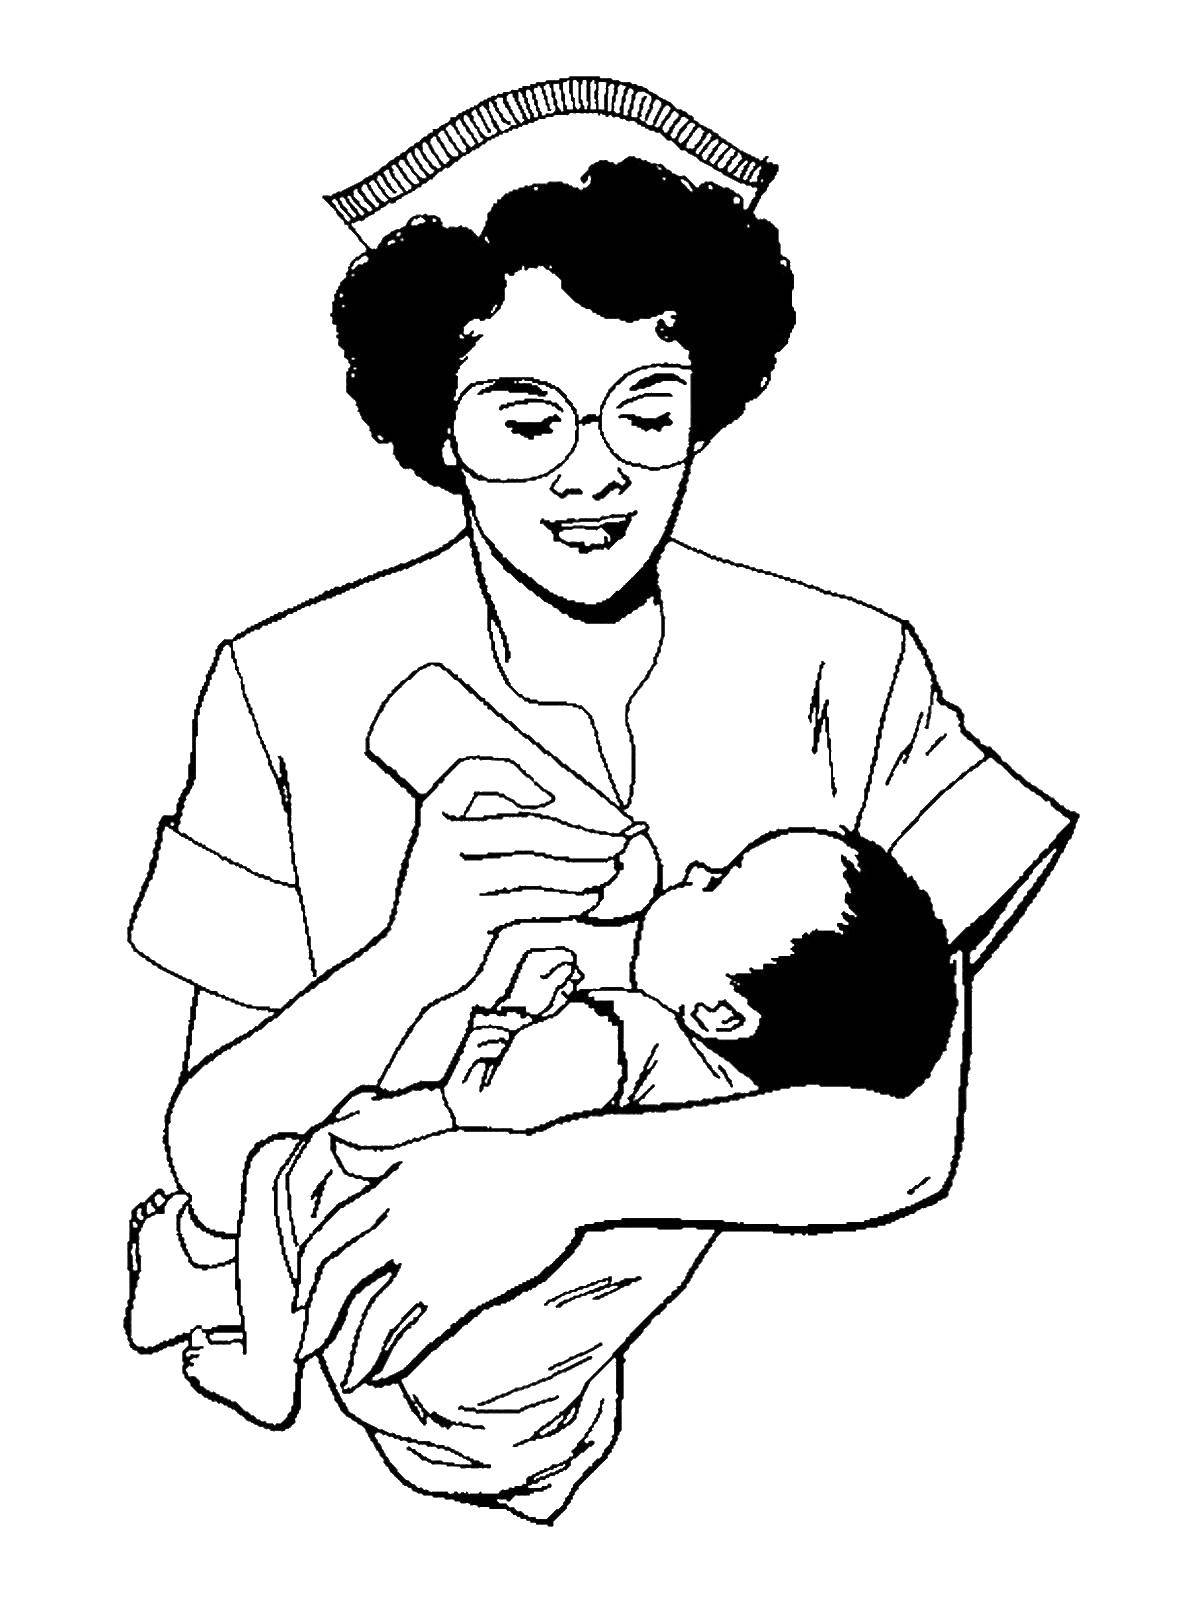 Coloring Nurse with baby. Category a profession. Tags:  profession, nurse, baby.